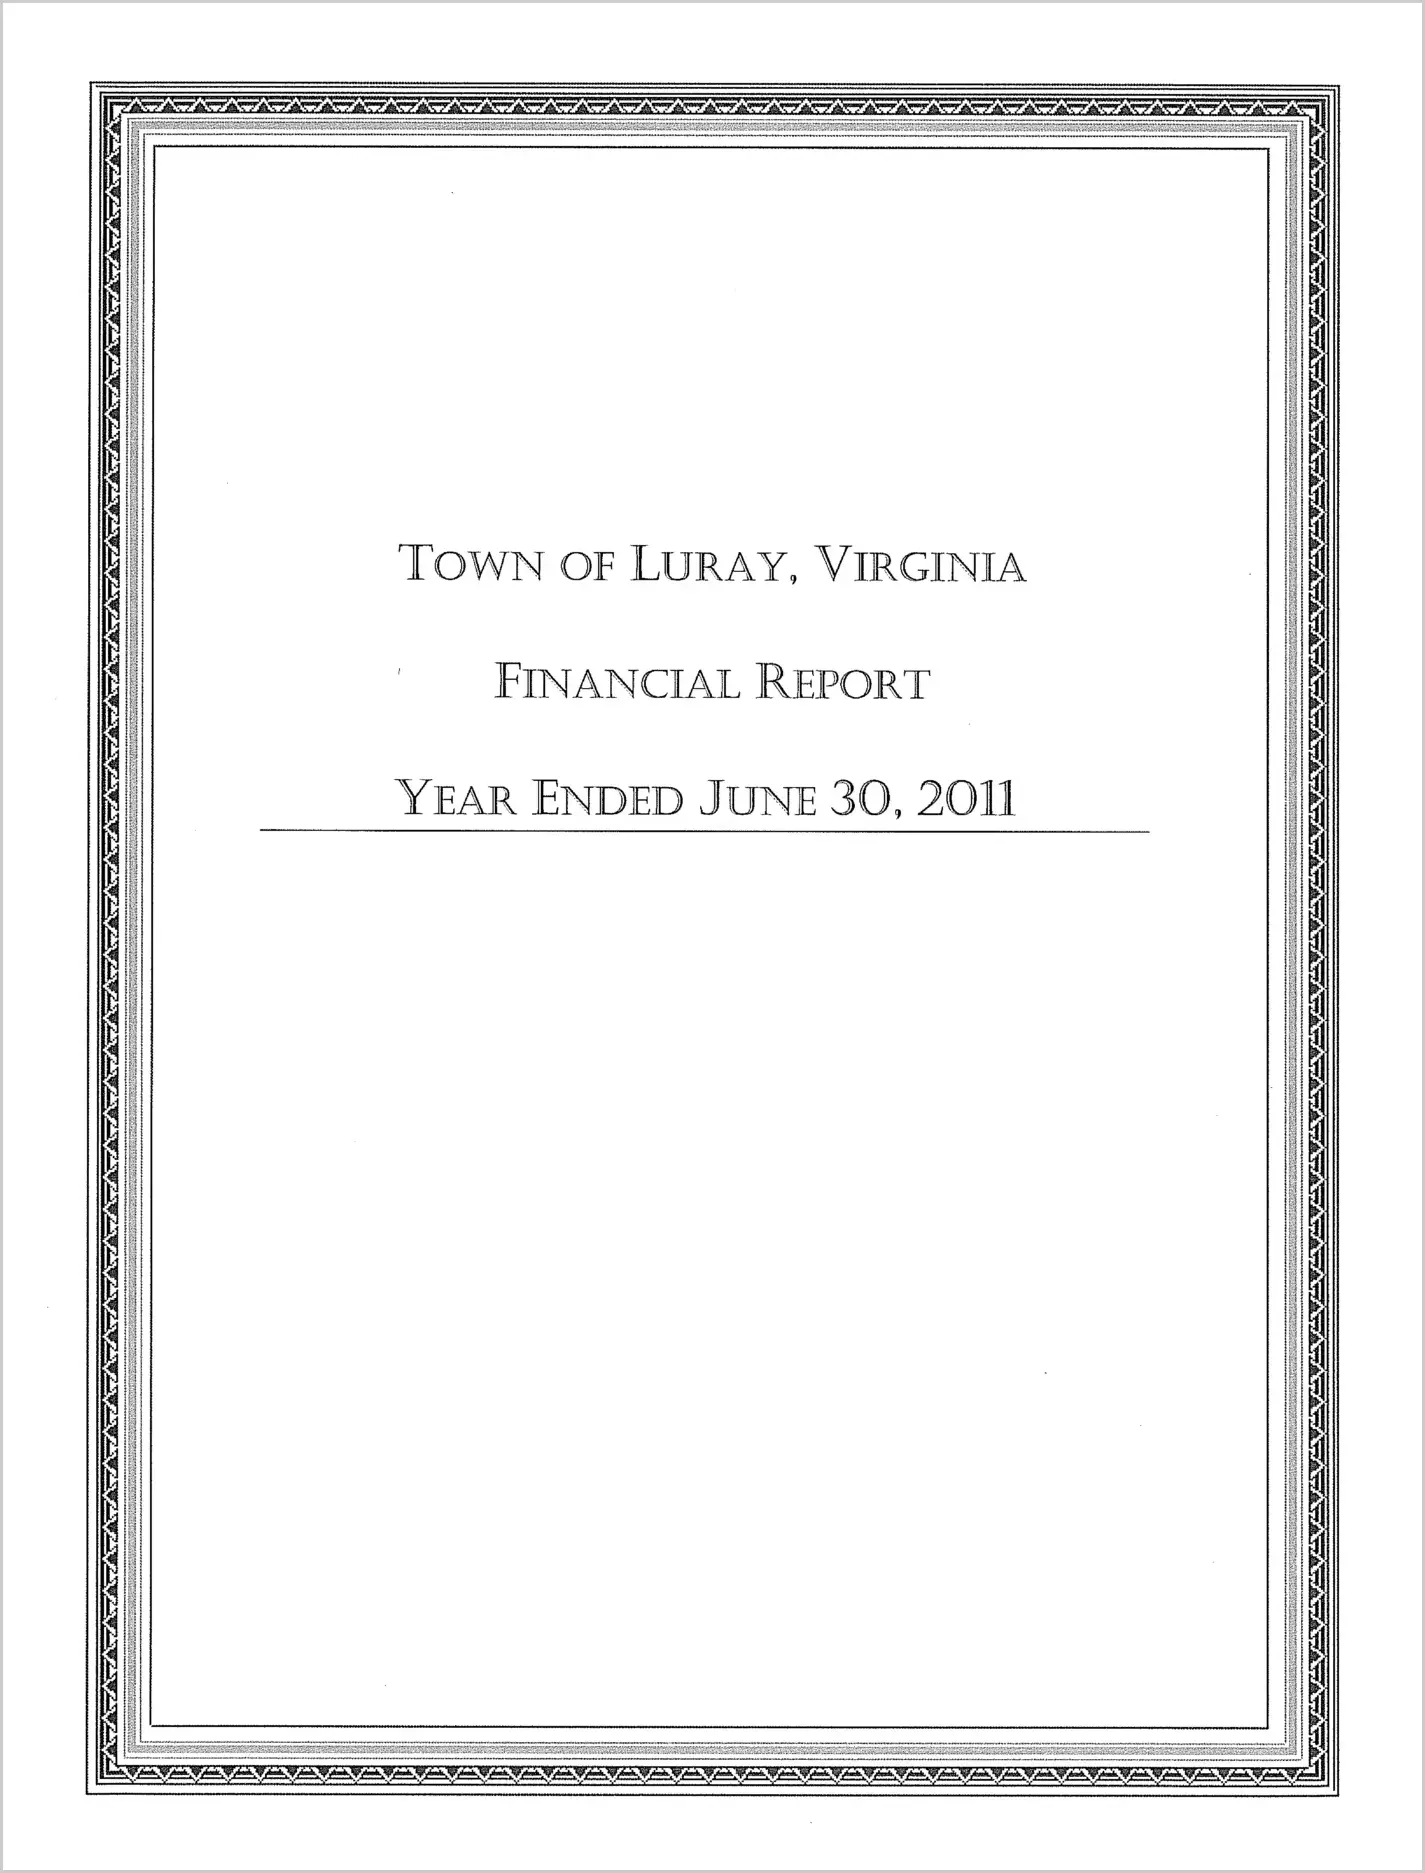 2011 Annual Financial Report for Town of Luray